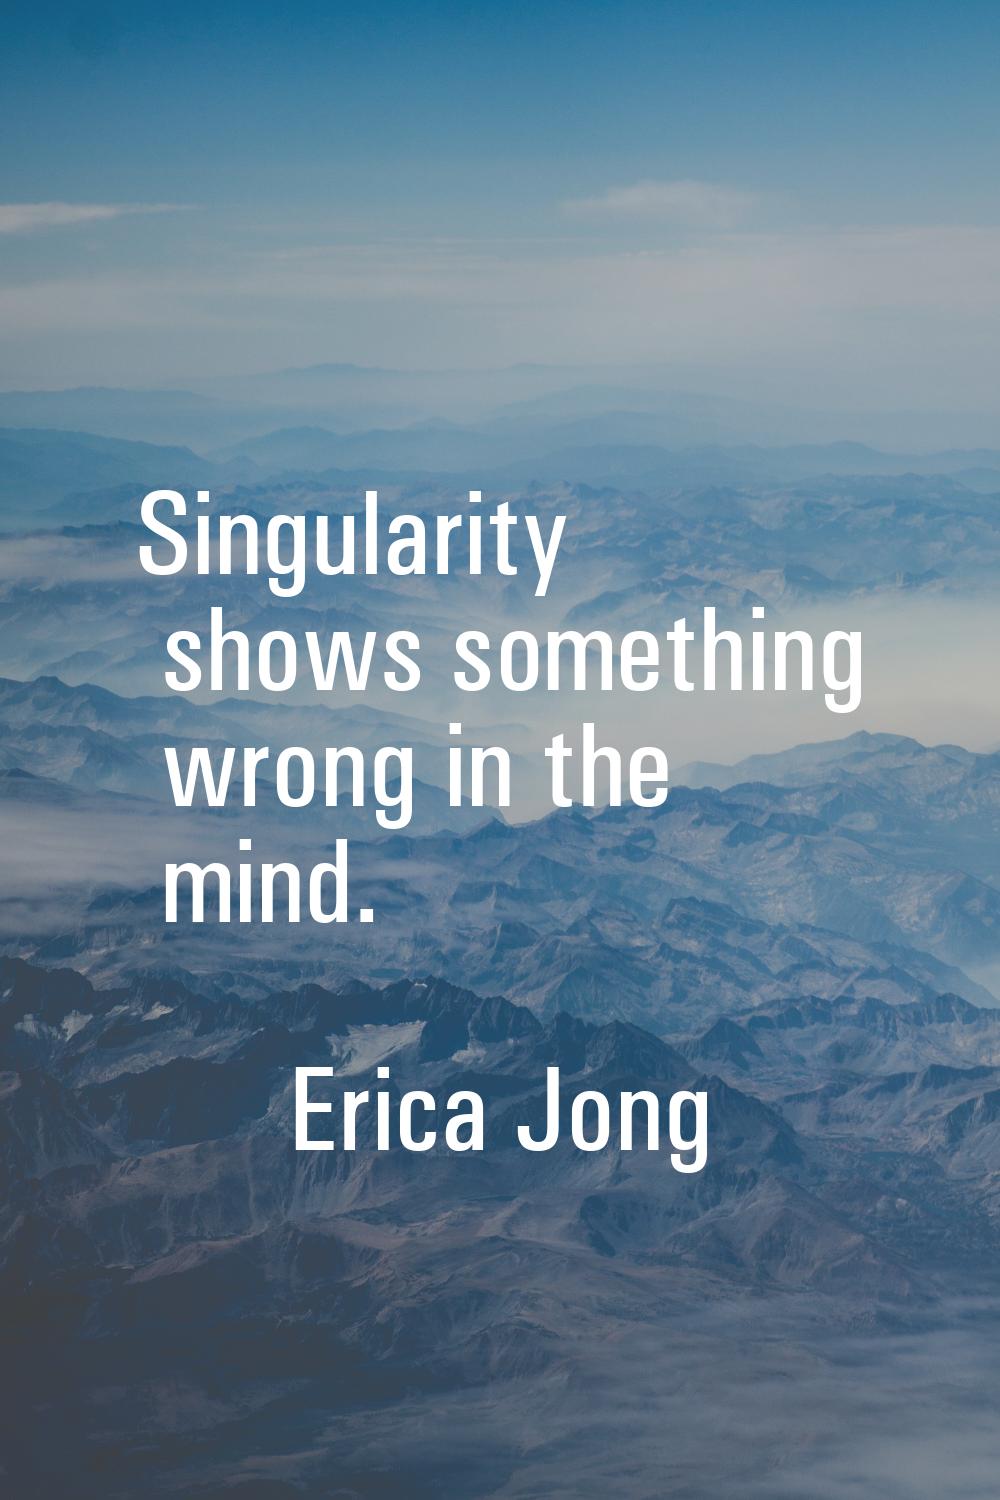 Singularity shows something wrong in the mind.